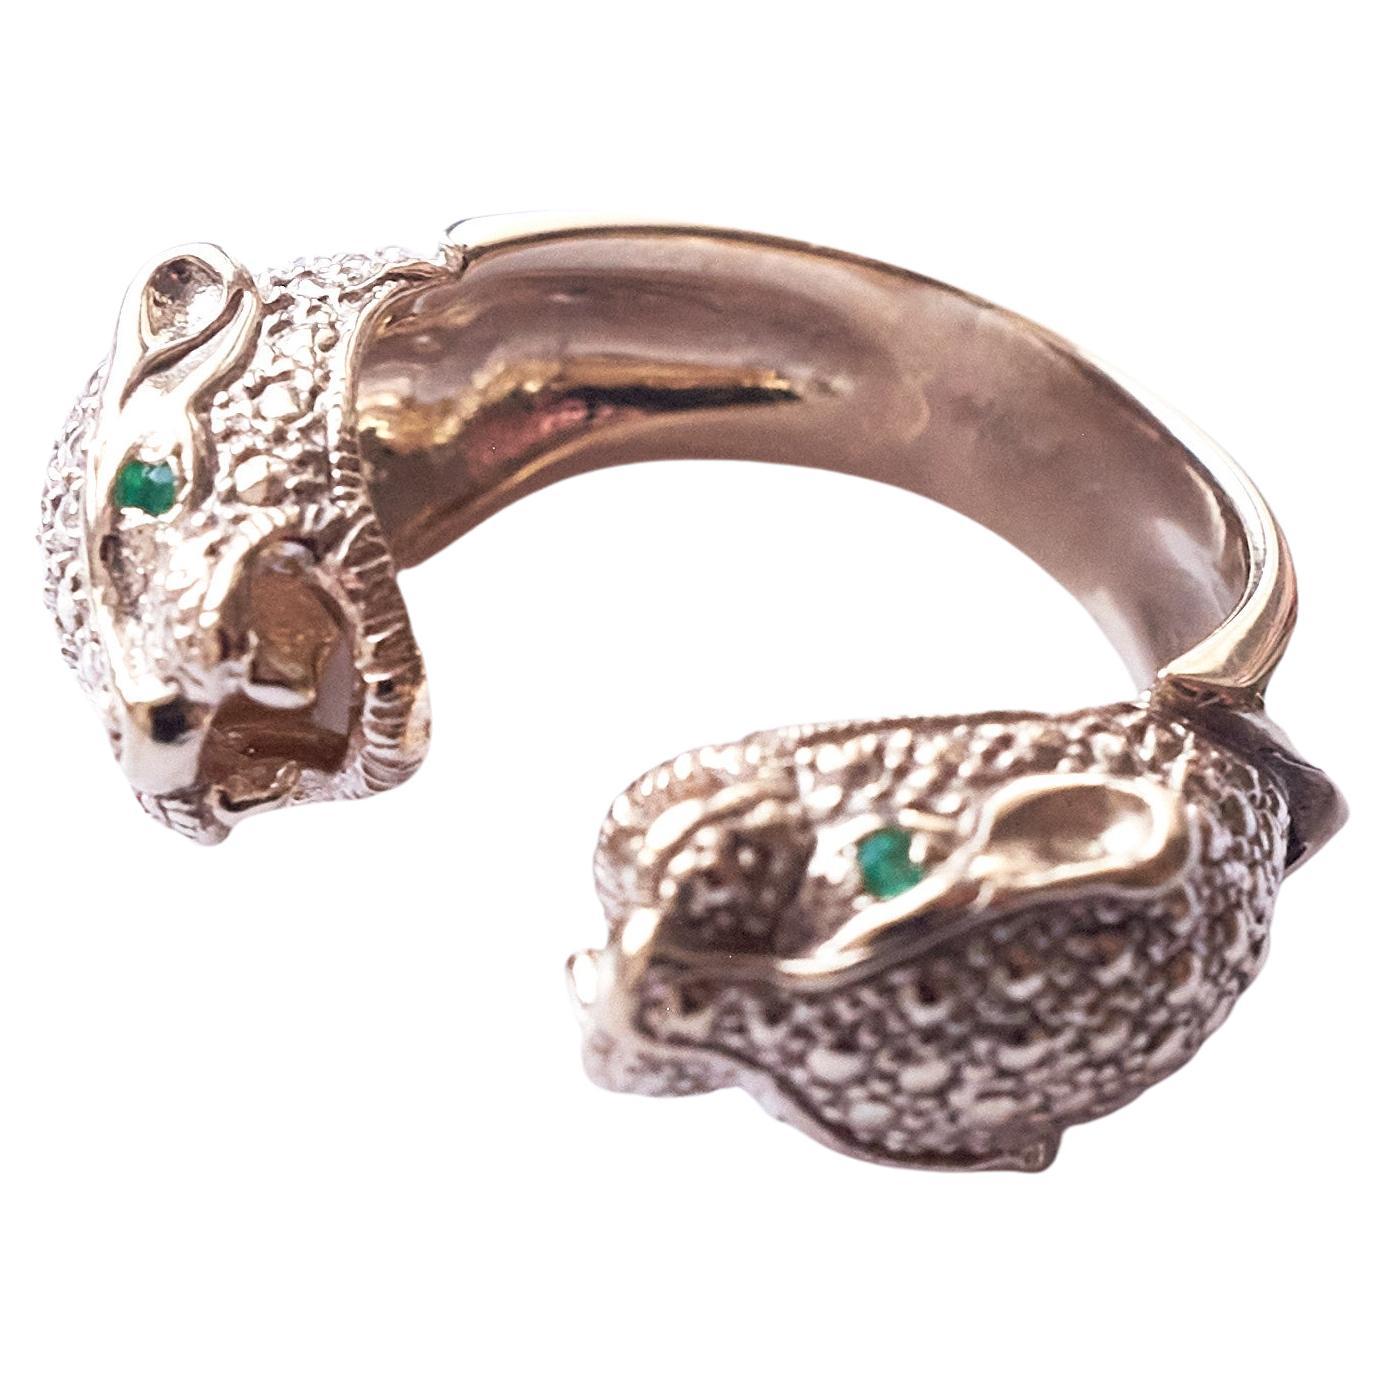 Emerald Jaguar Ring Bronze Animal Jewelry Cocktail Ring J Dauphin

Made in Los Angeles

This Ring is tiny adjustable on the finger between sizes 6-8
Can be made in Gold or Silver

Available for immediate delivery, 